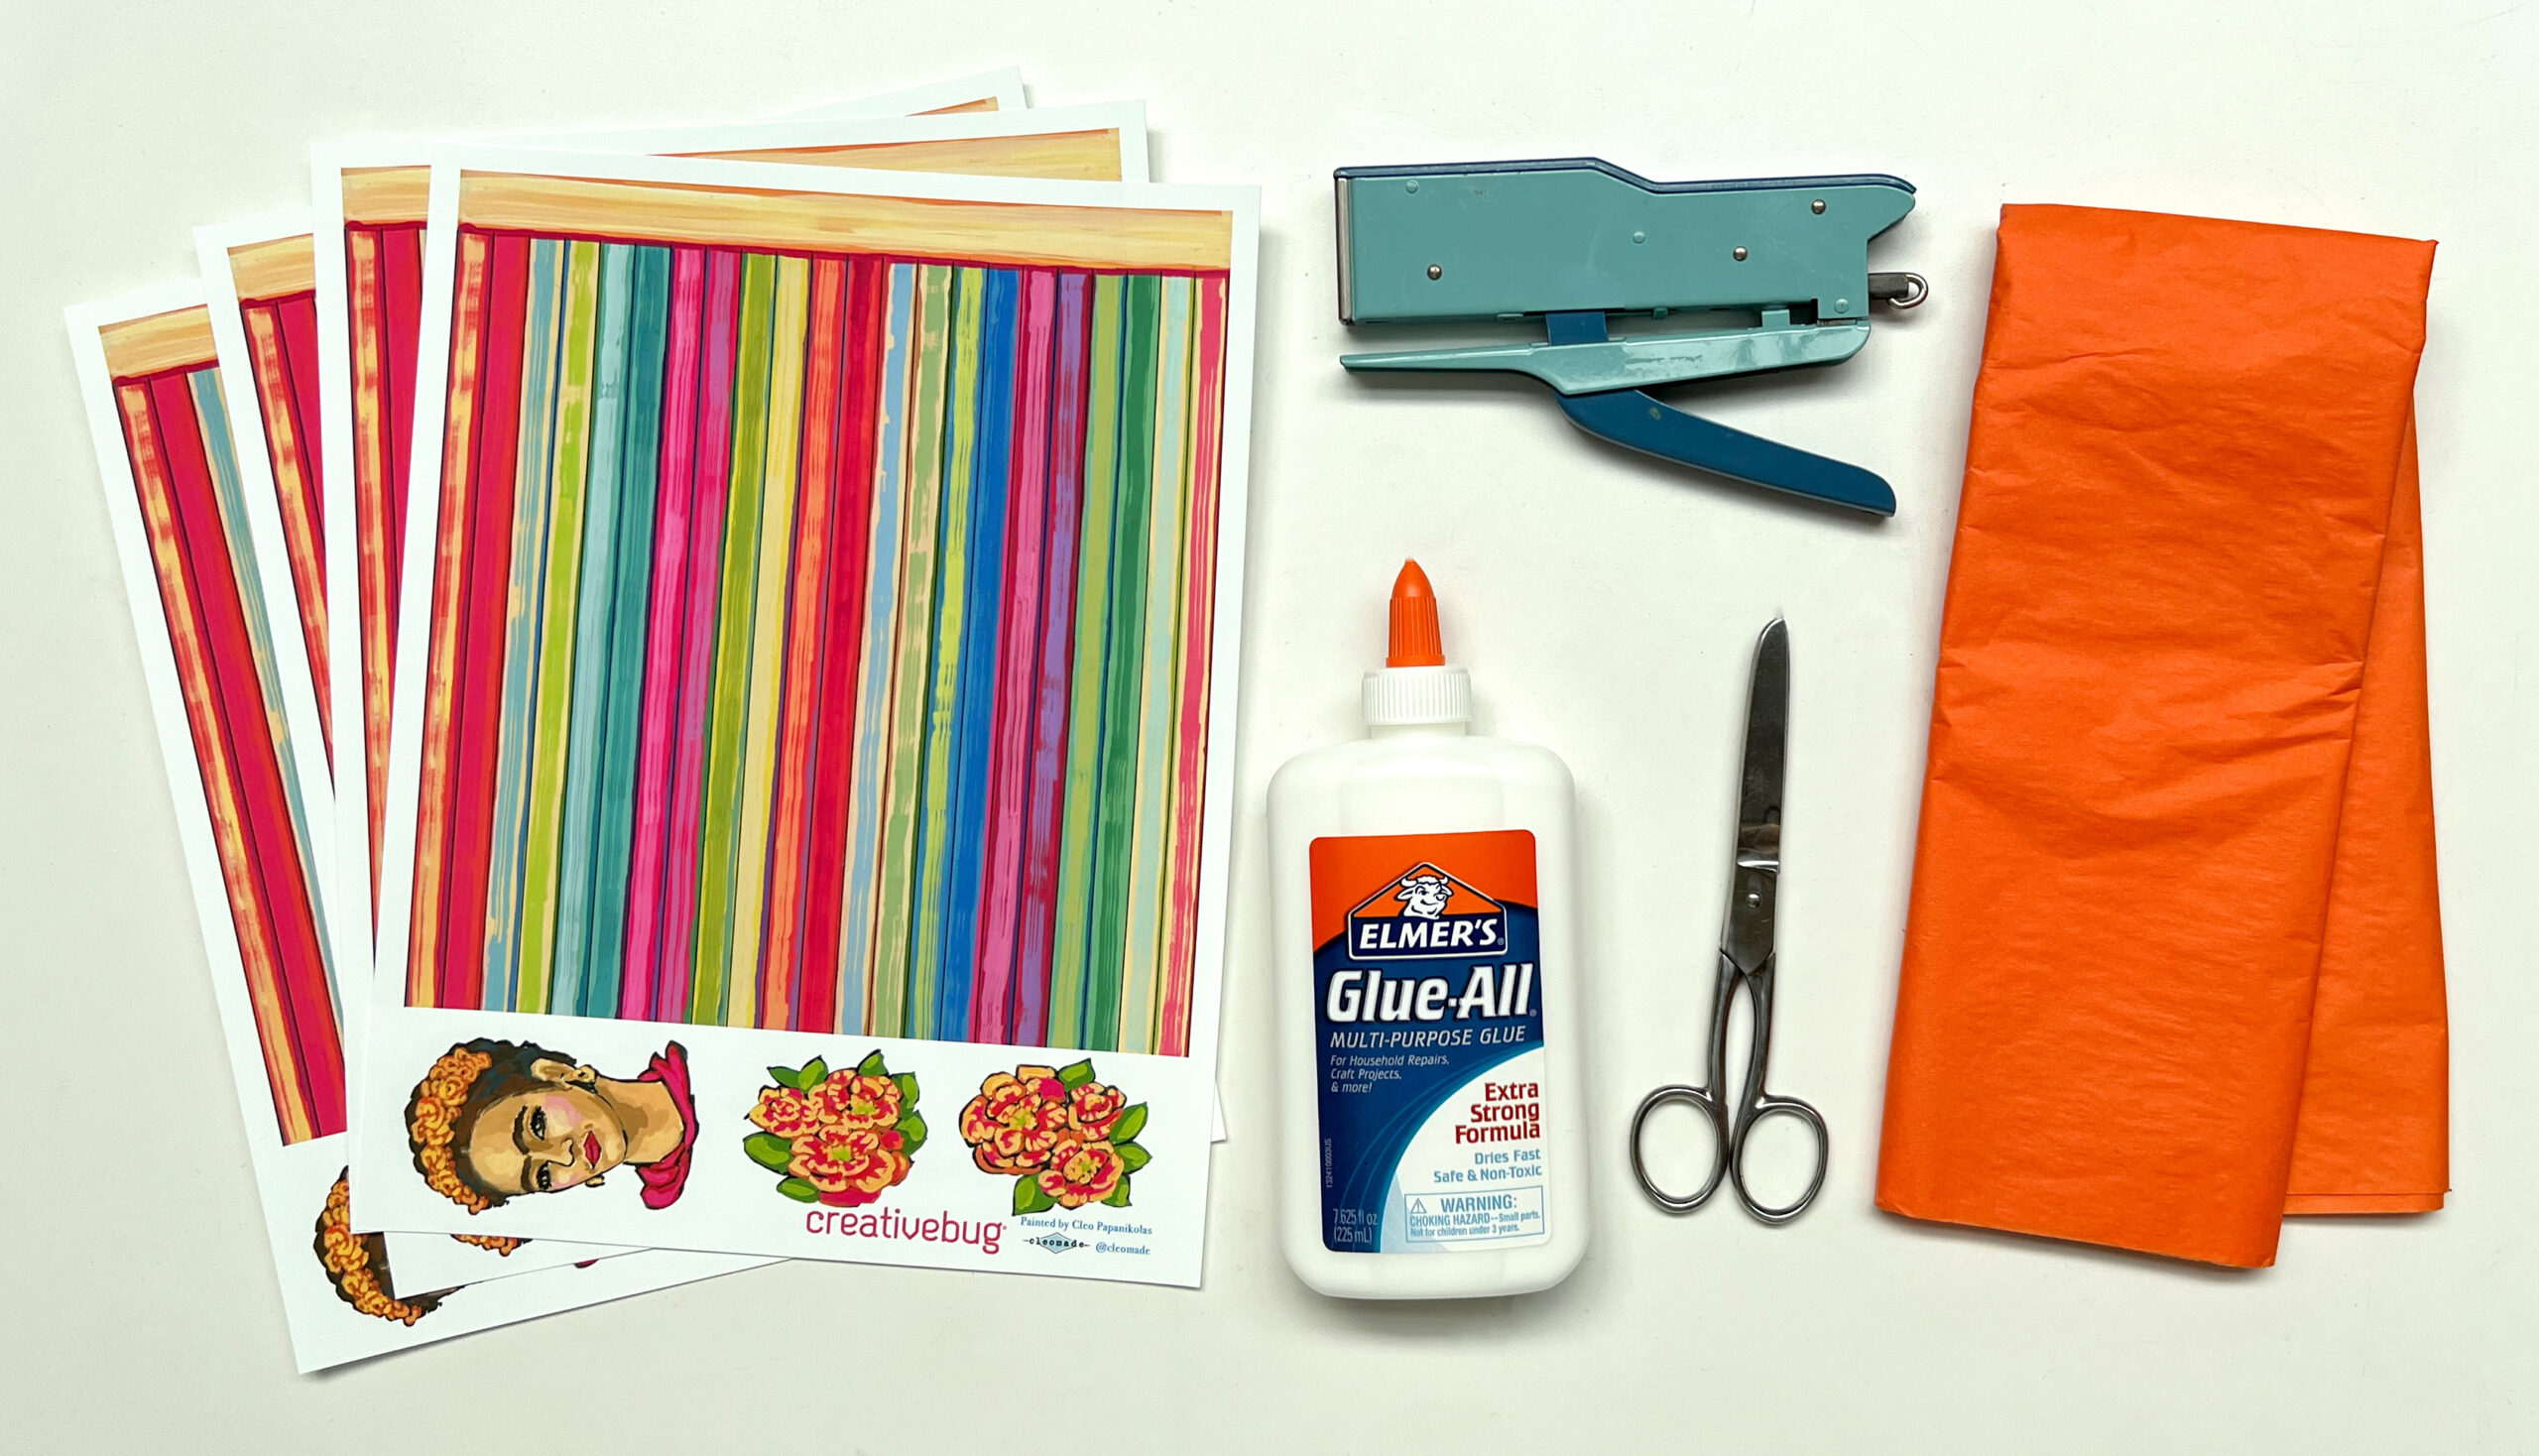 image of materials needed to weave a bag out of paper: free printable templates with original artwork of frida kahlo's portrait, stapler, elmer's glue, scissors, and colorful tissue paper